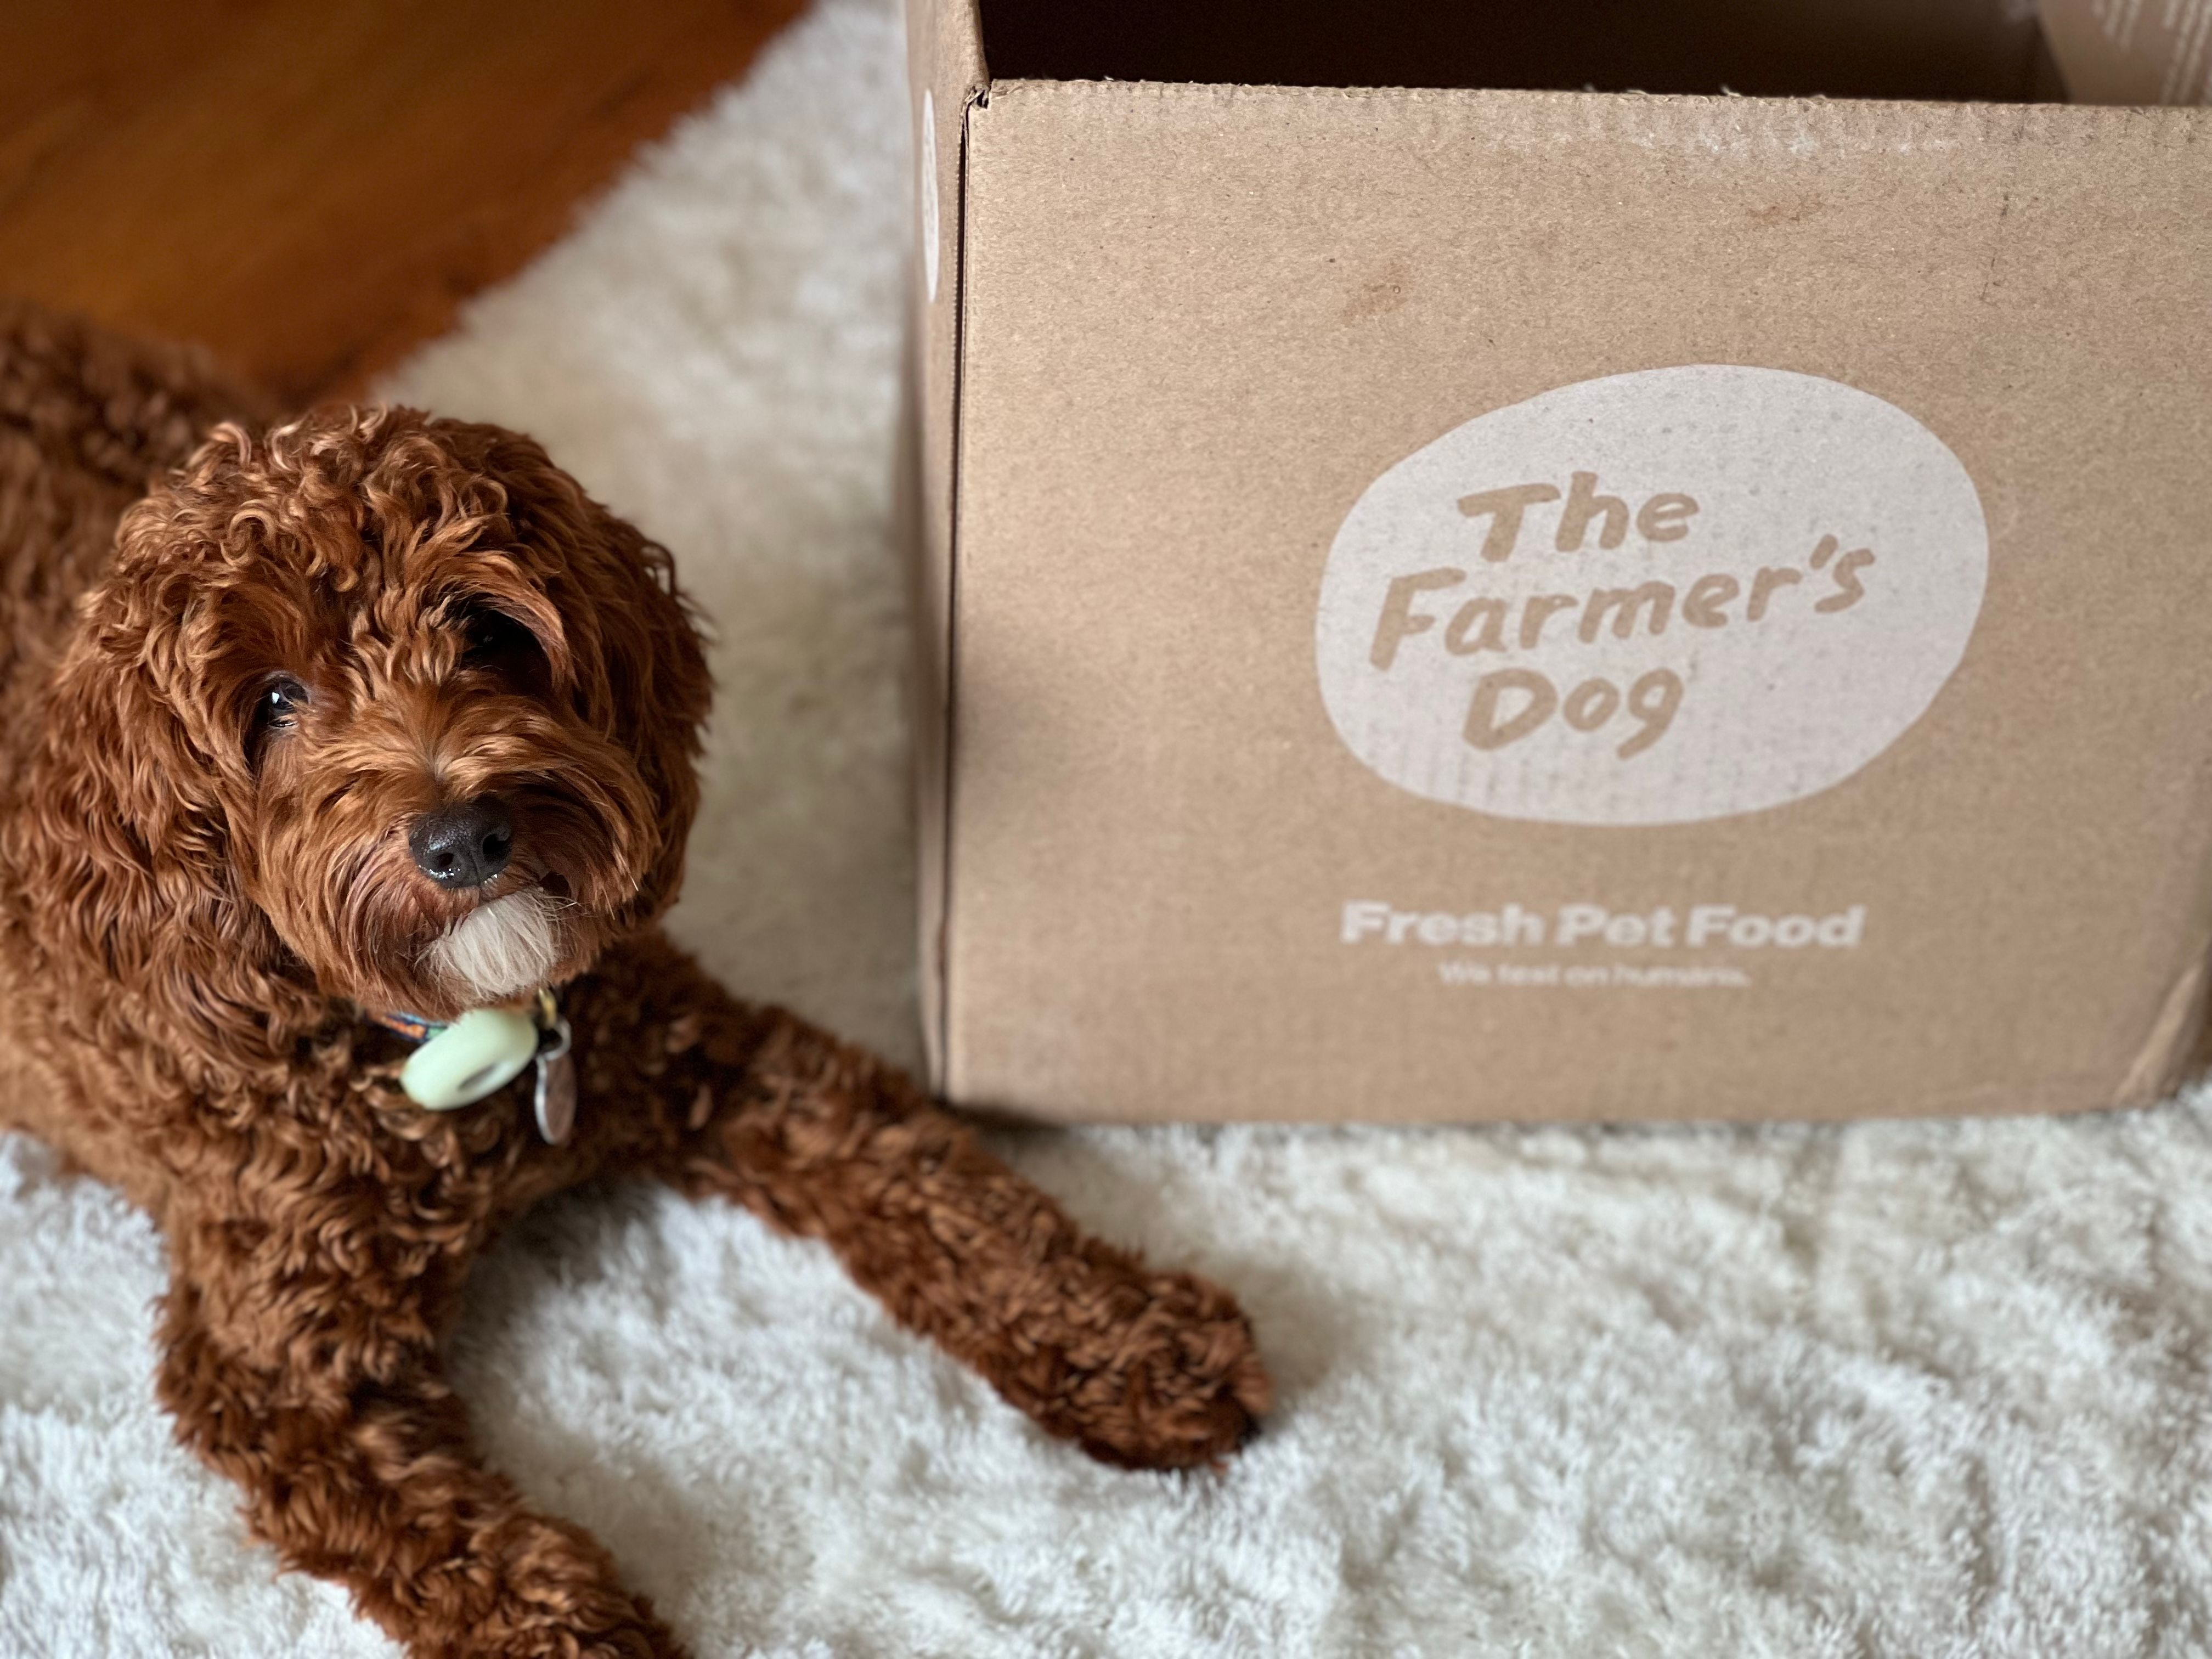 The Farmer’s Dog meal delivery